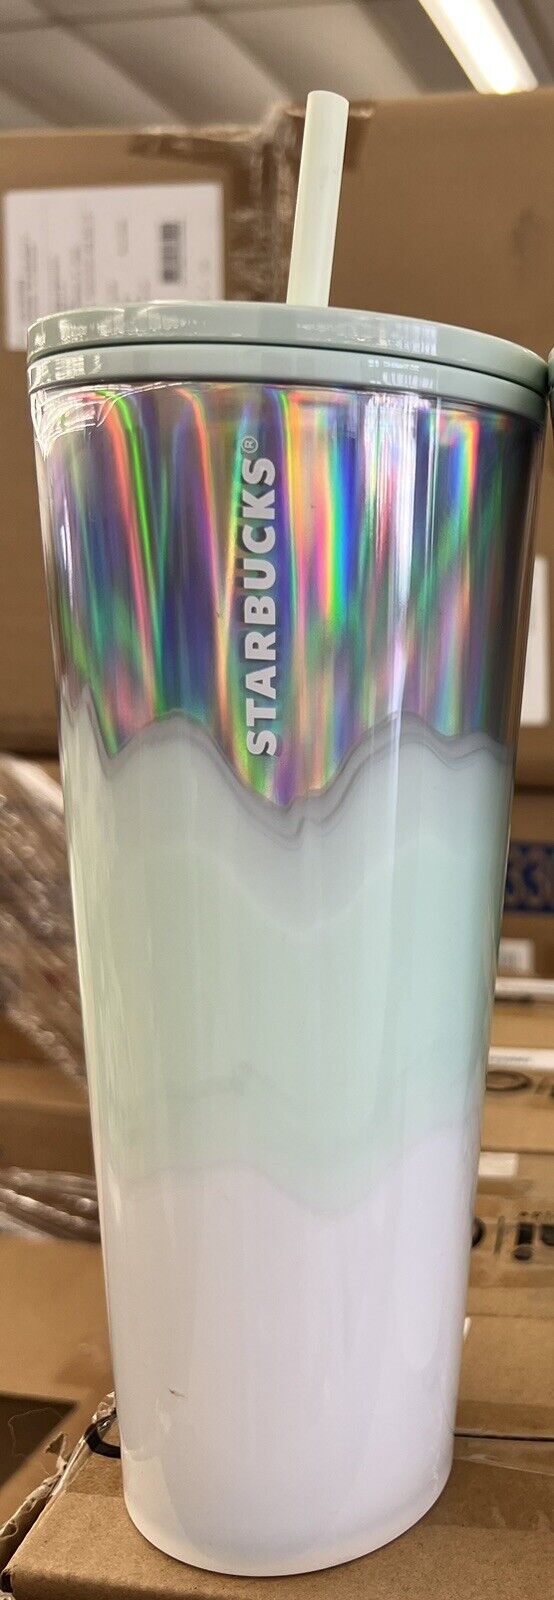 Starbucks Holiday Ice Wave 2021 Tumbler Iridescent Icy Mint White & Silver 24oz